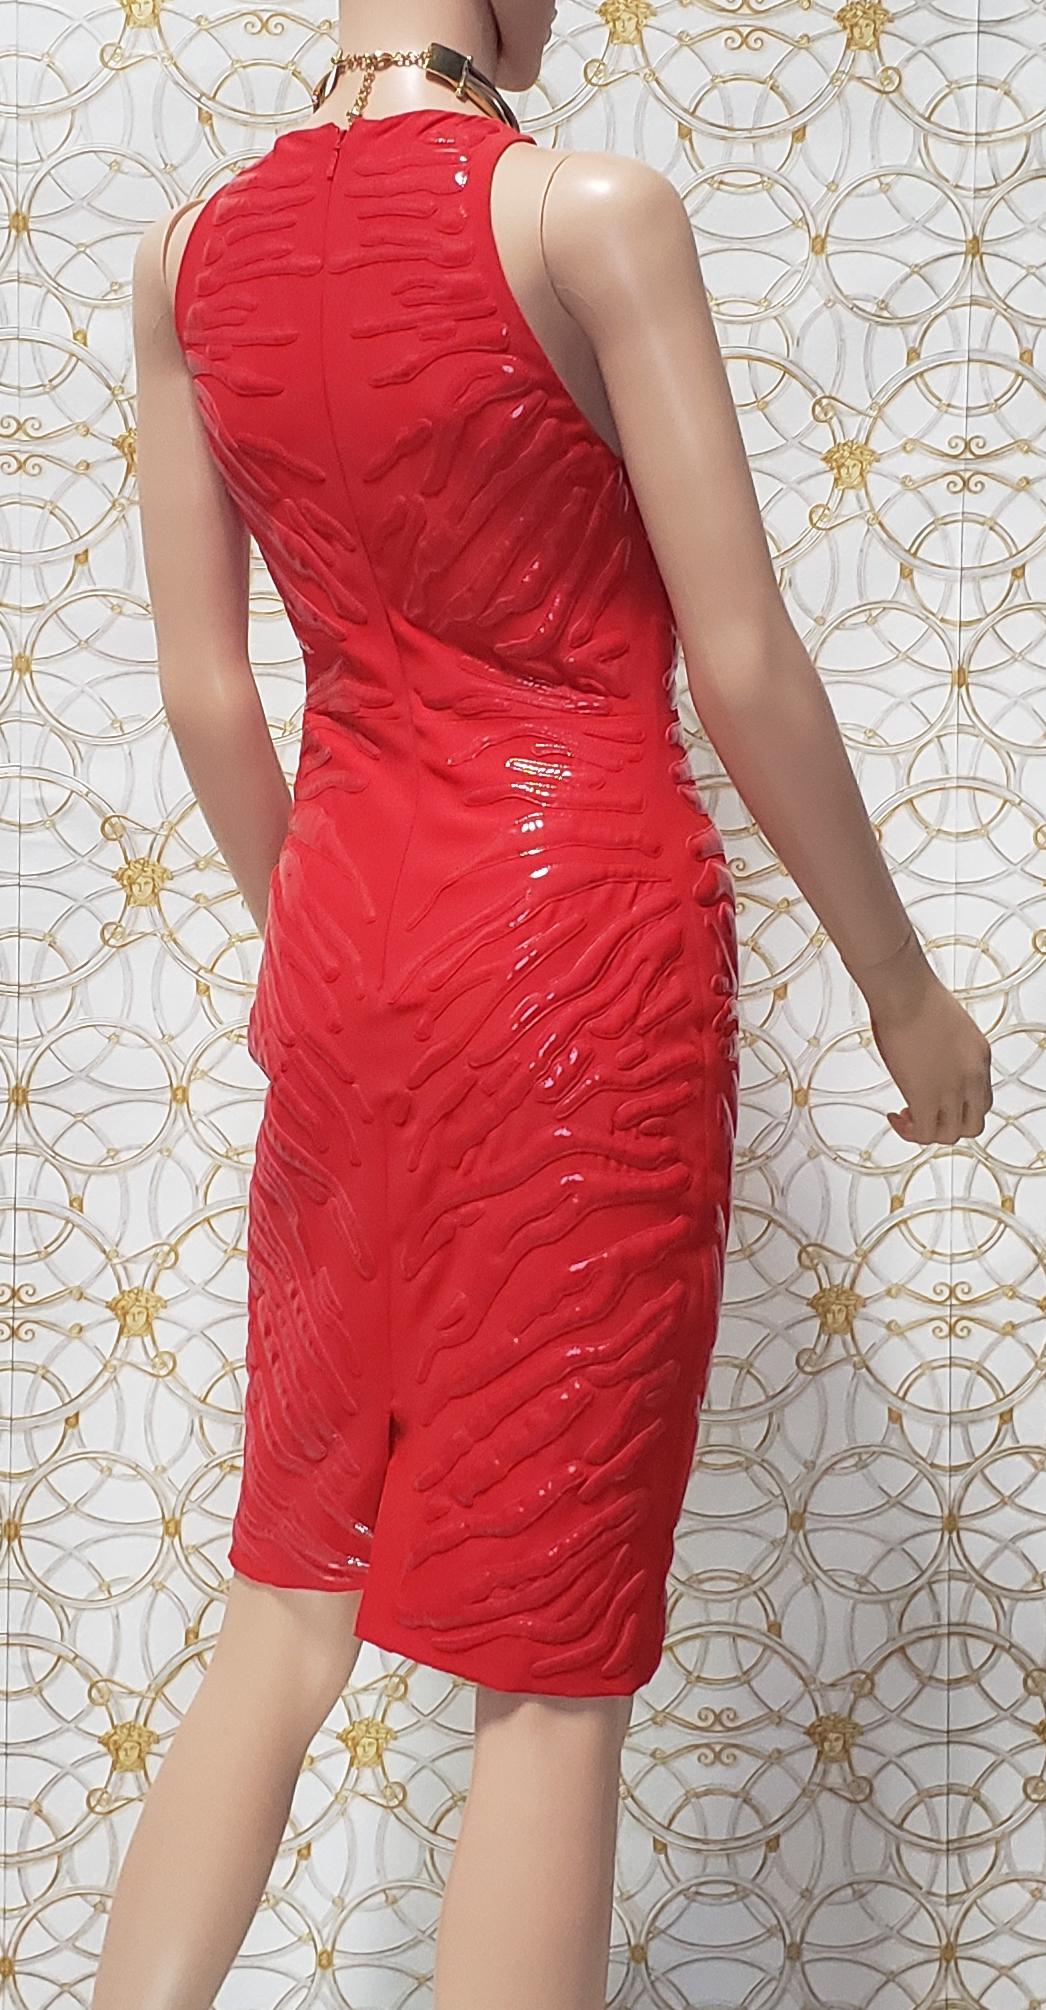 Versace Red Crepe Cady Sheath Dress With Vinyl Animal Stripes 40 - 4/6 For Sale 4